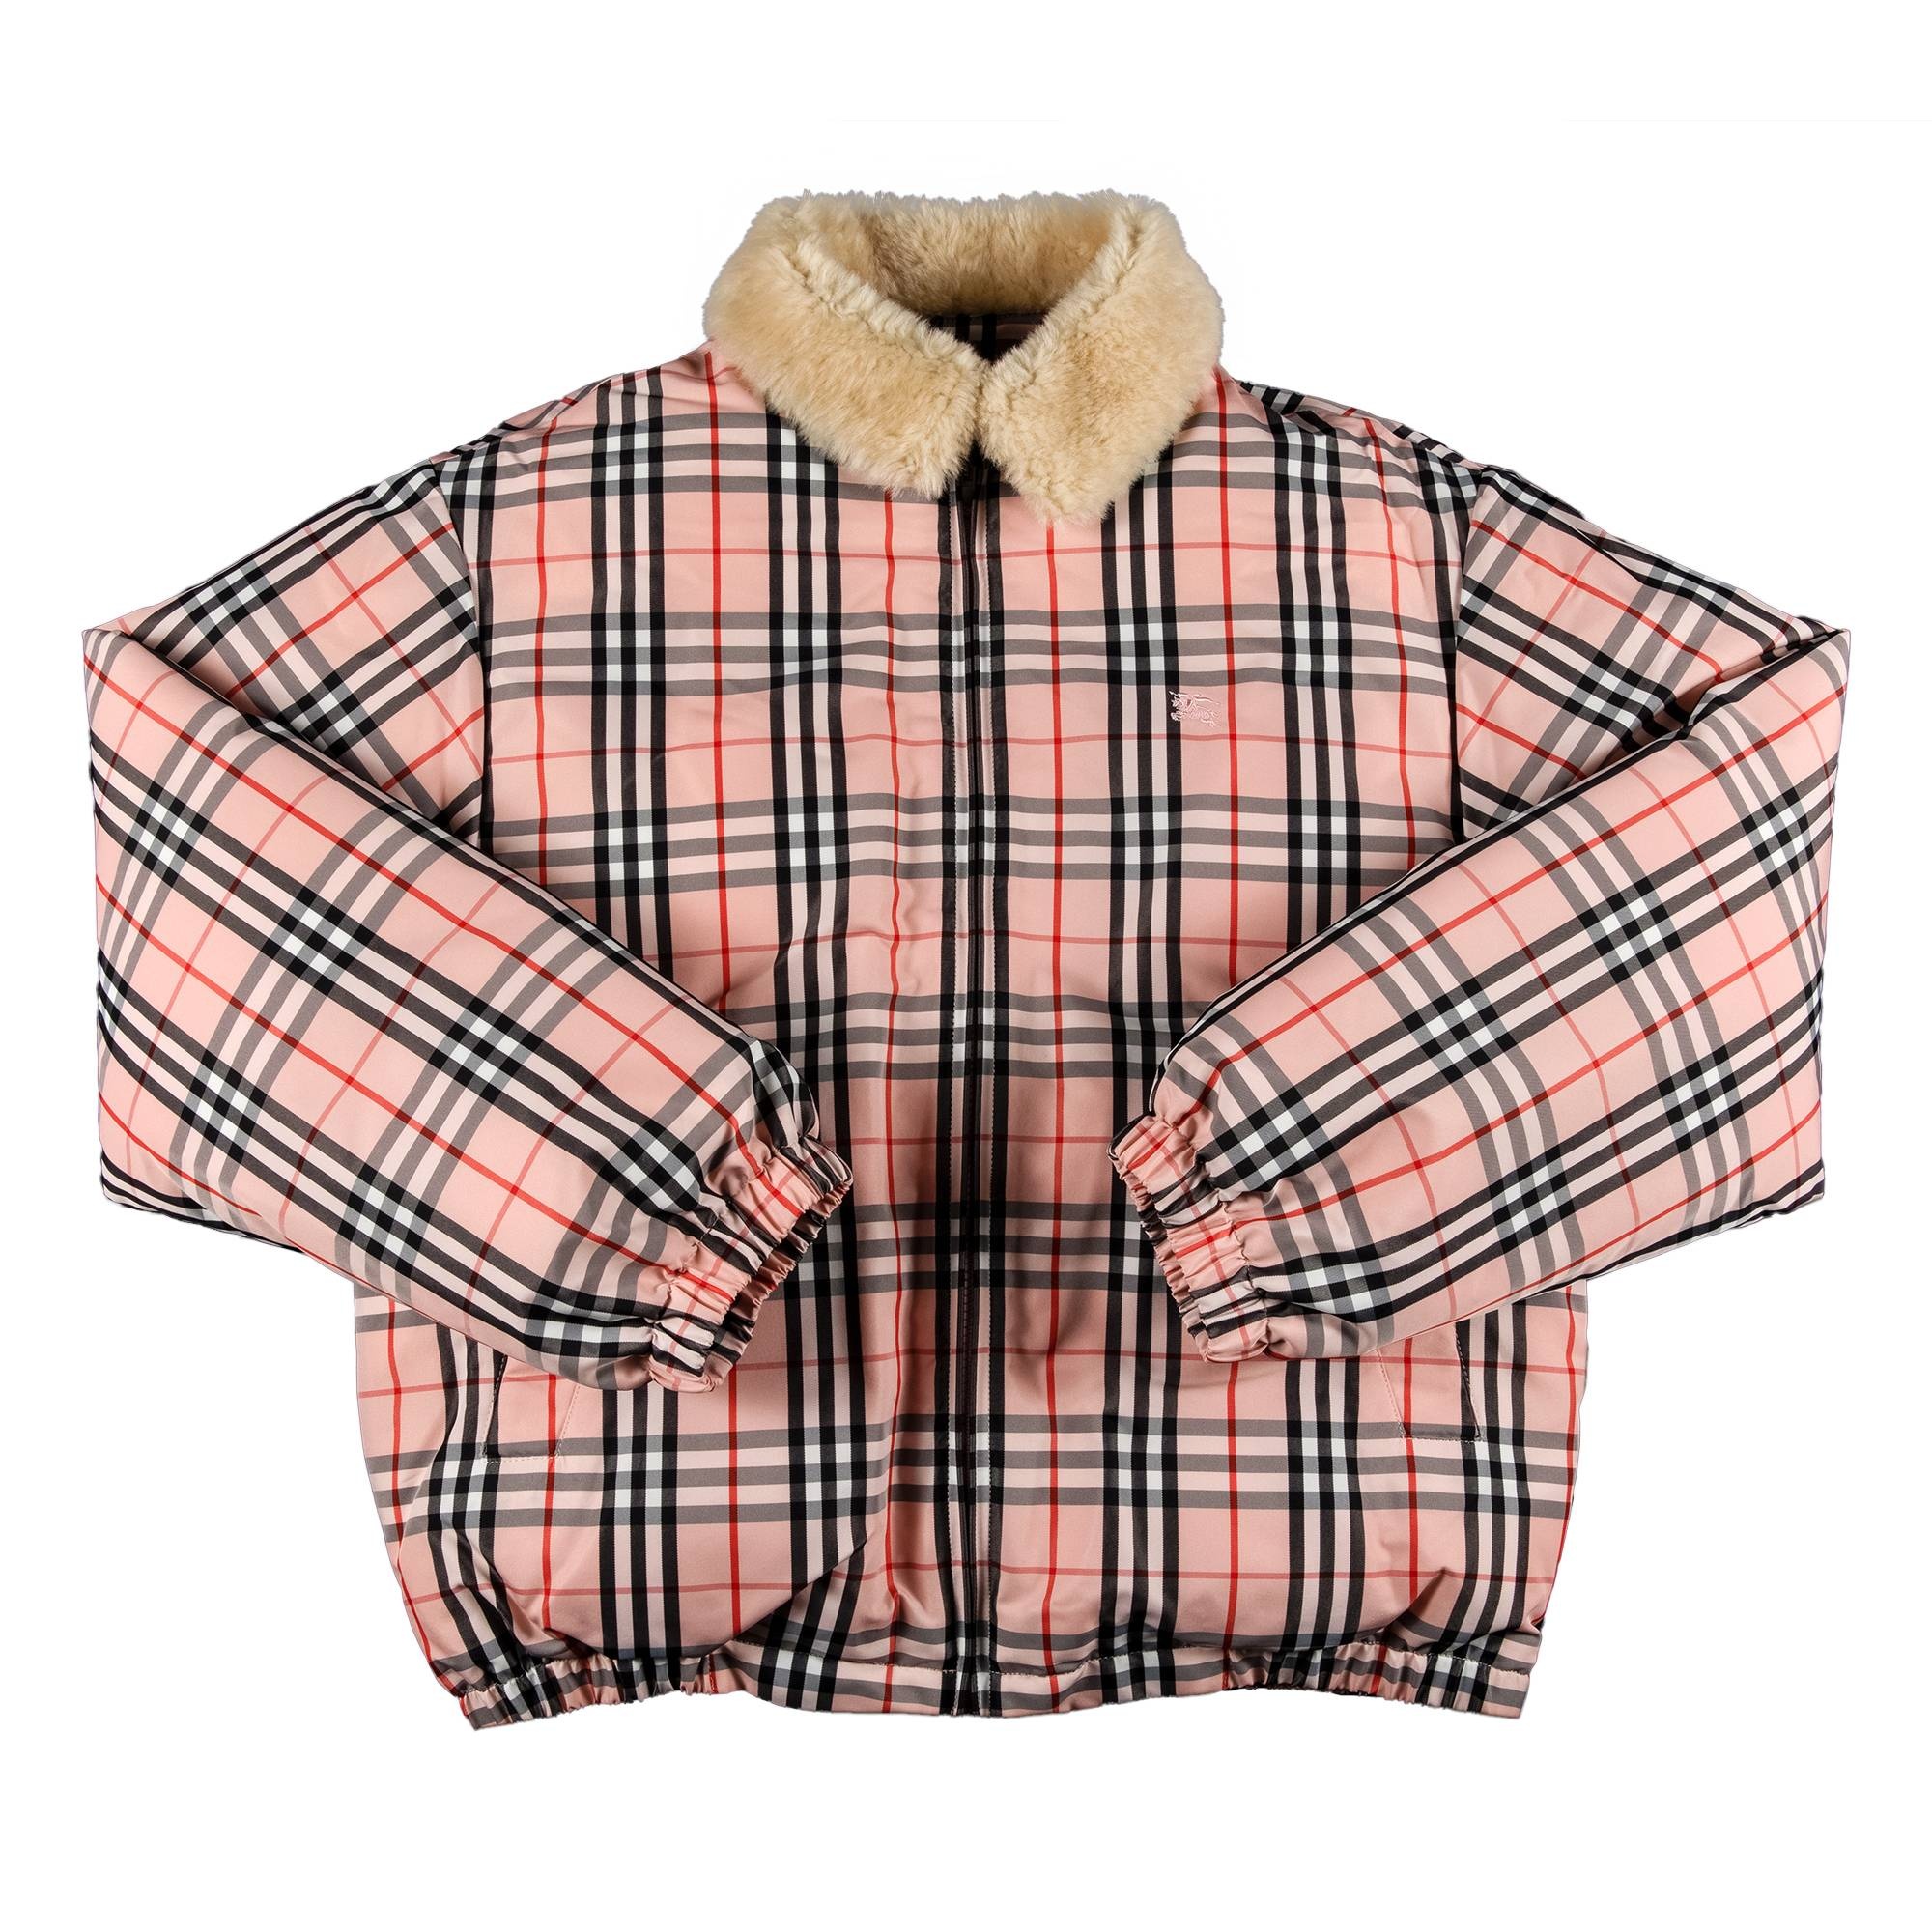 Supreme x Burberry Shearling Collar Down Puffer Jacket 'Pink' - 1